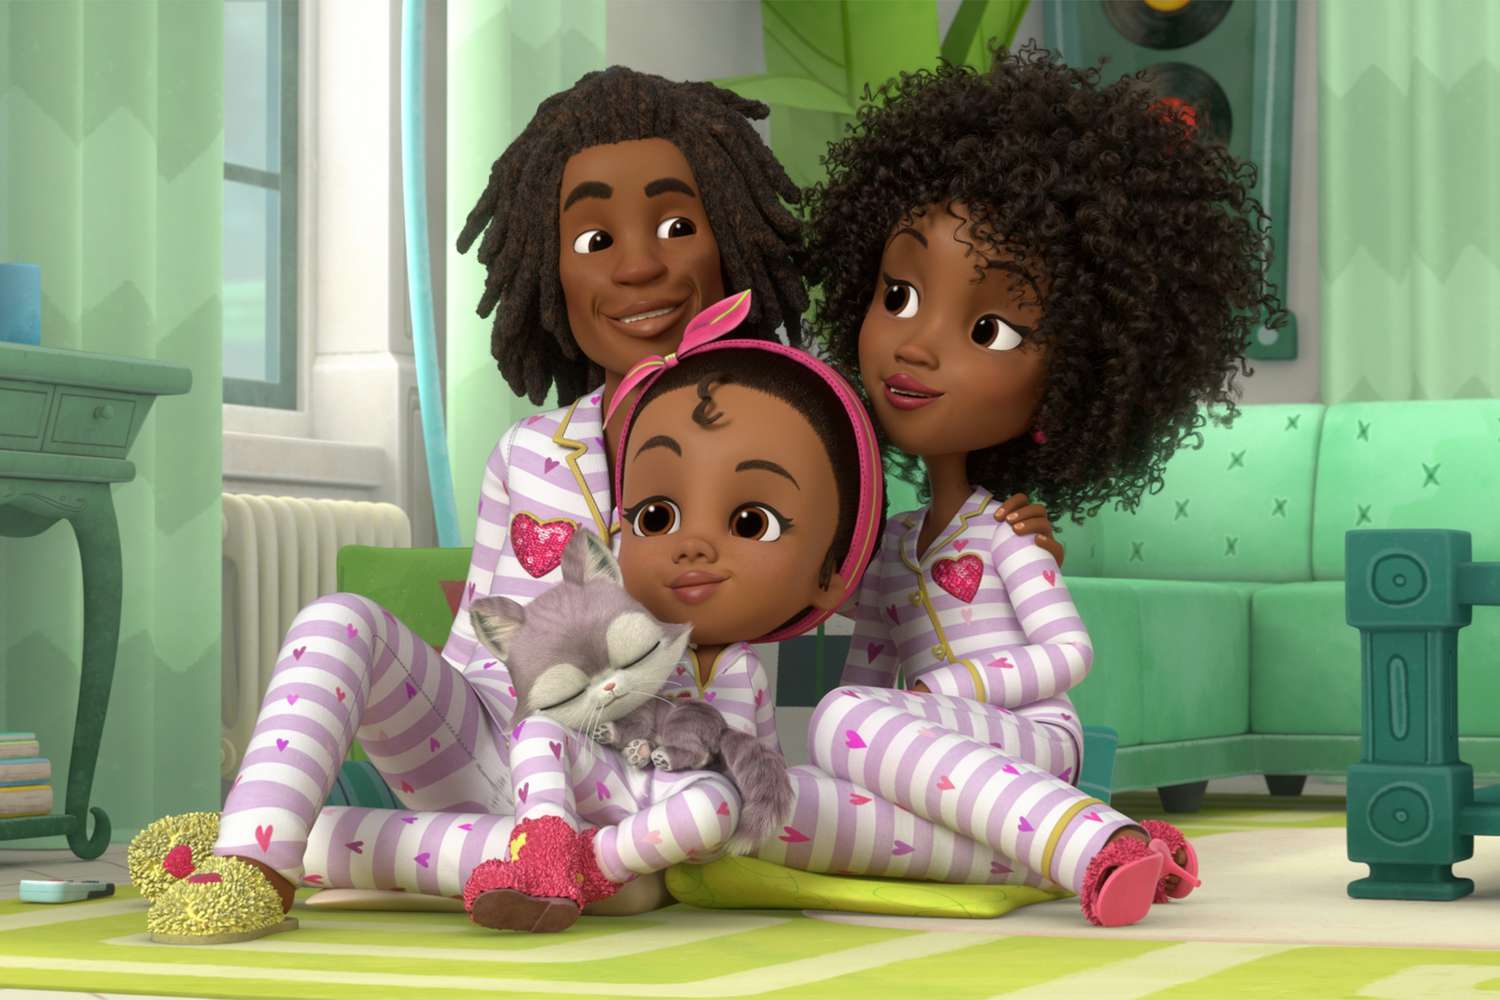 Made by Maddie cartoon pulled by Nickelodeon after Hair Love backlash |  